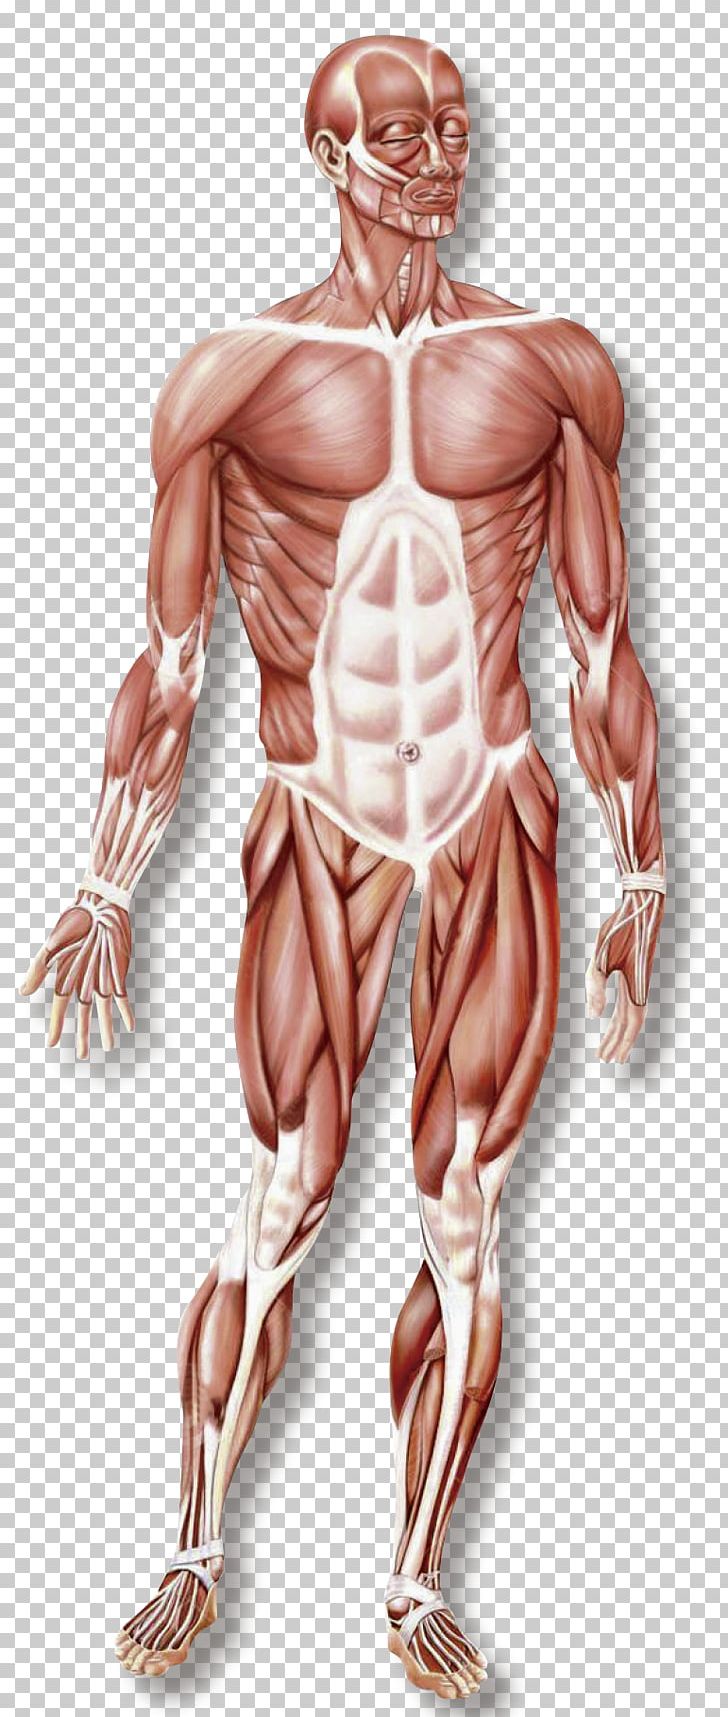 Hand Muscular System Skeletal Muscle Organ System Human Body PNG, Clipart, Abdomen, Anatomy, Arm, Back, Bodybuilder Free PNG Download